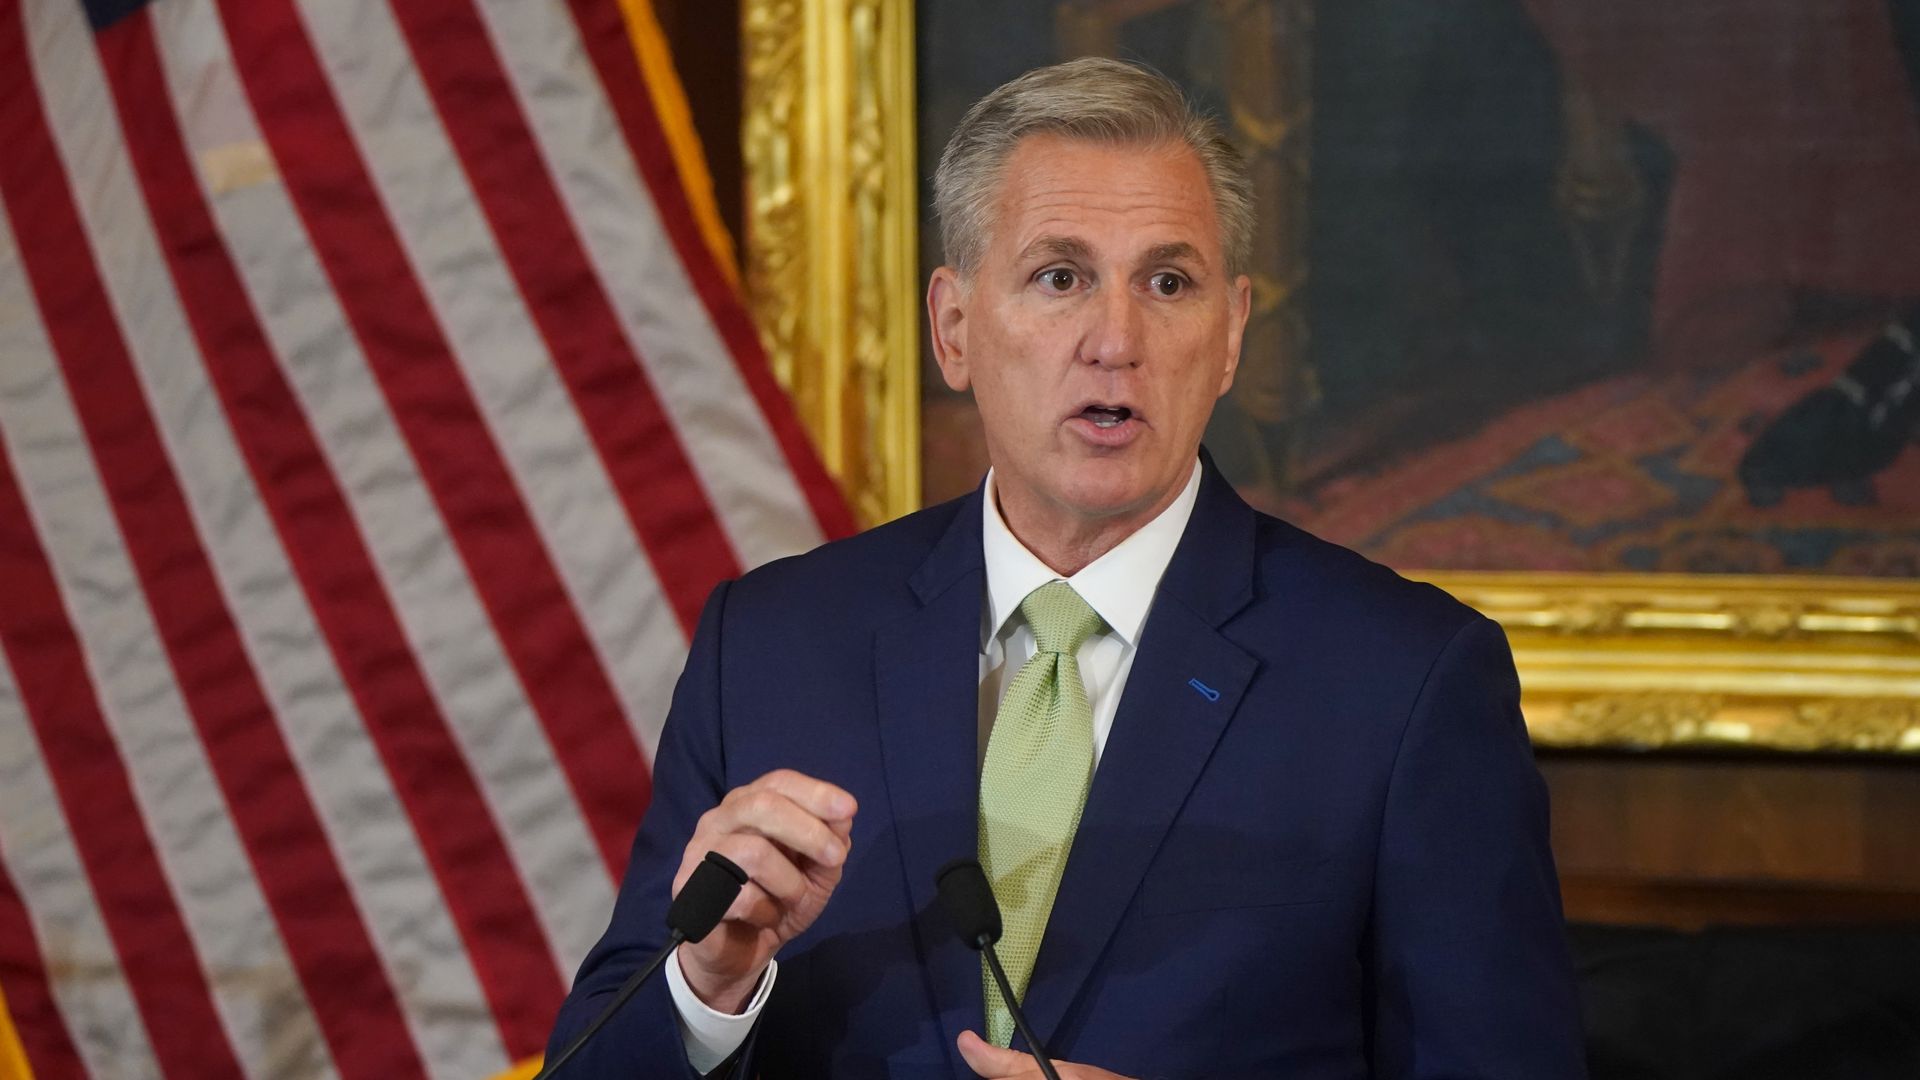 House Speaker Kevin McCarthy, wearing a blue suit, white shirt and green tie, speaks in front of an American flag and a large portrait.